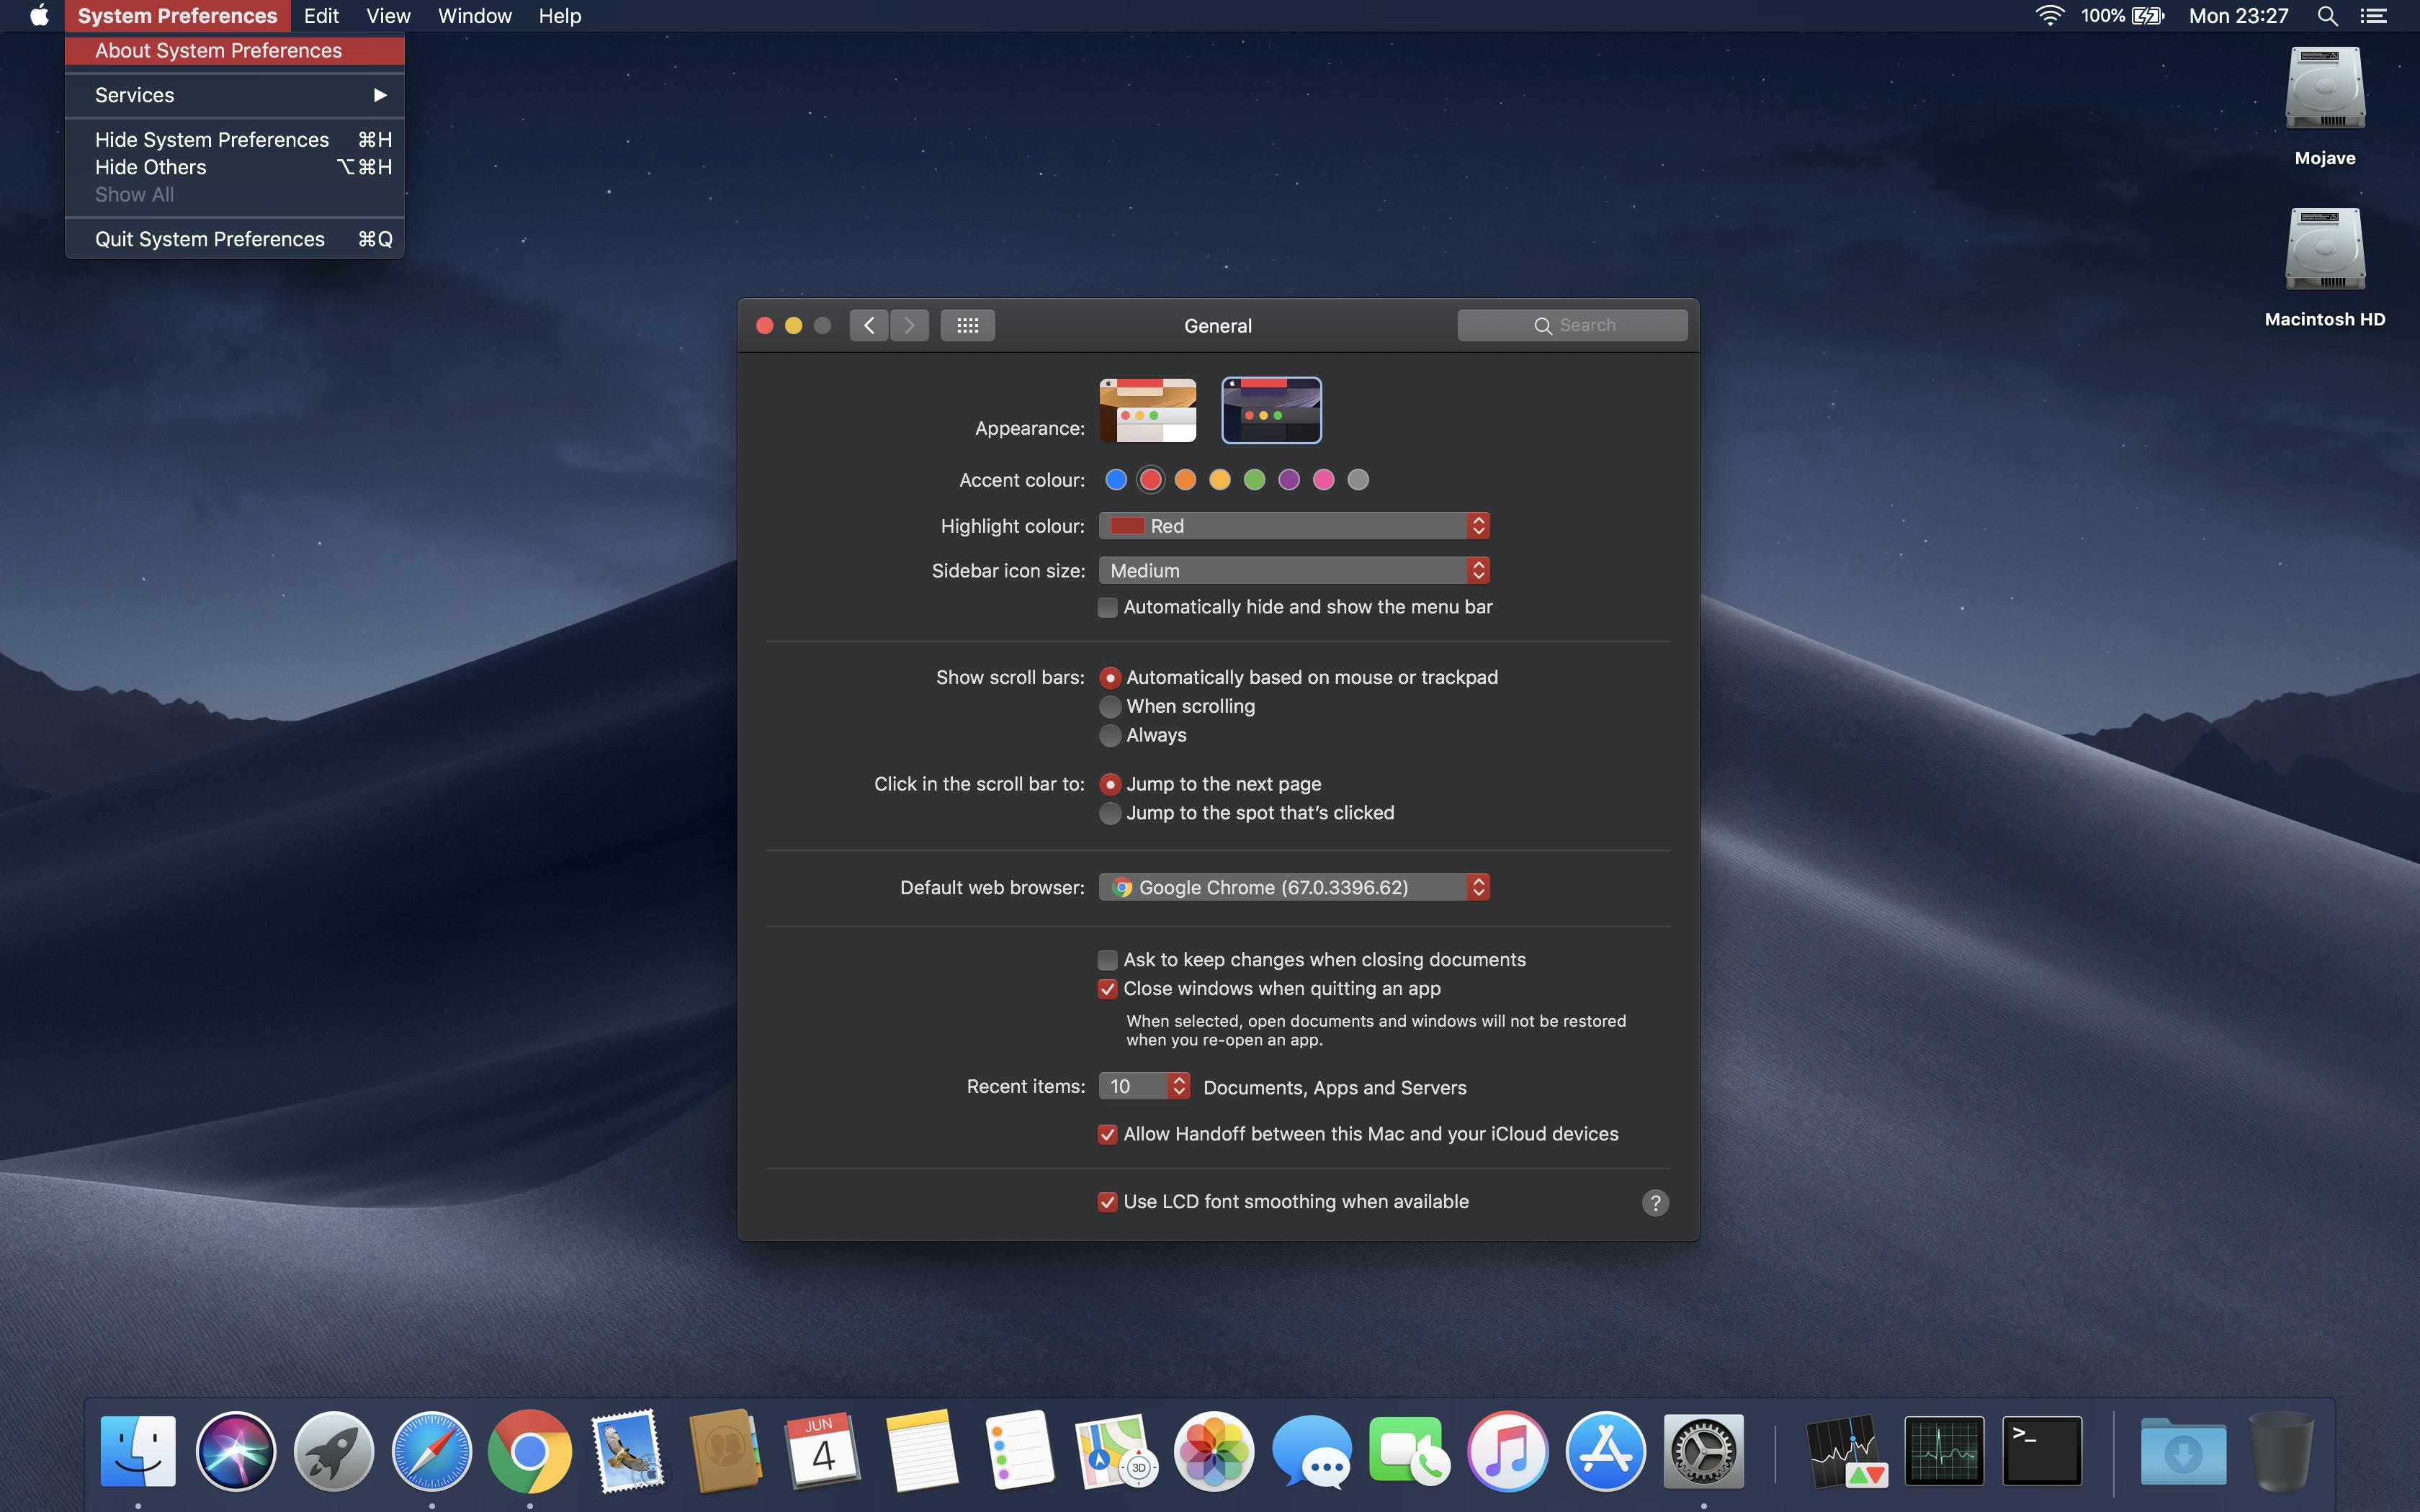 MacOS Mojave allows you to set a range of accent colors